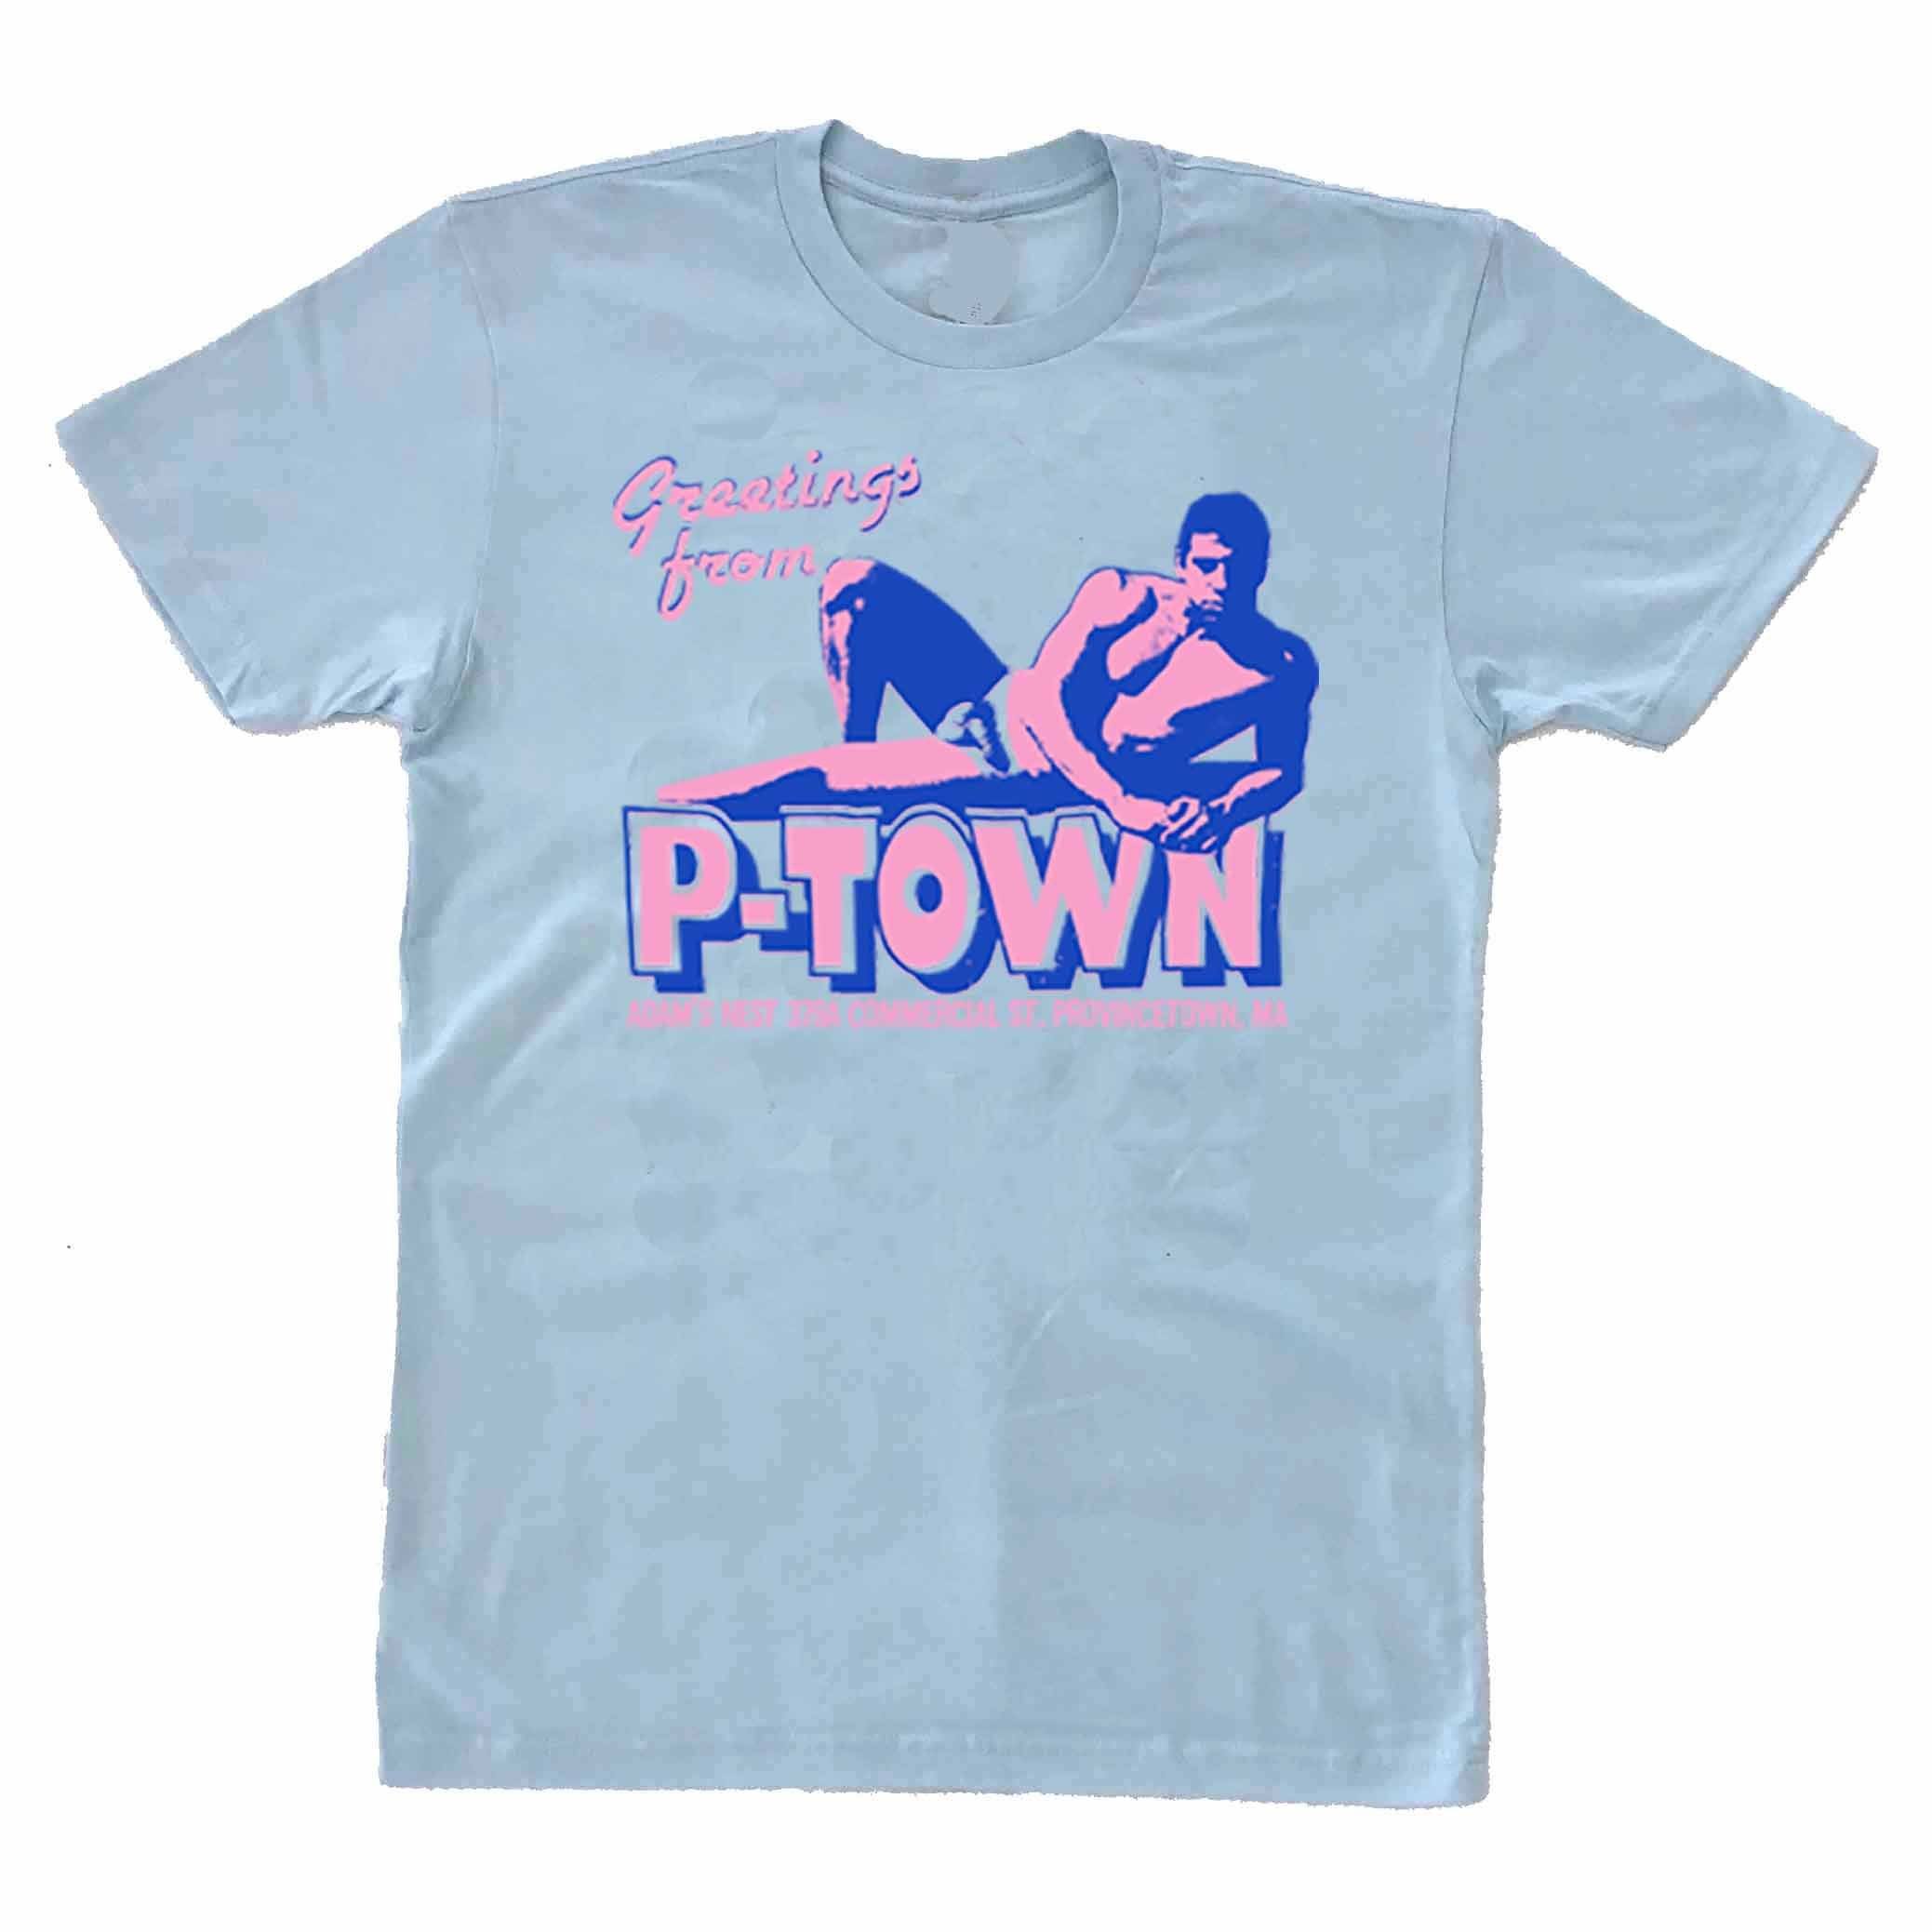 Greetings From P-town! T-Shirt